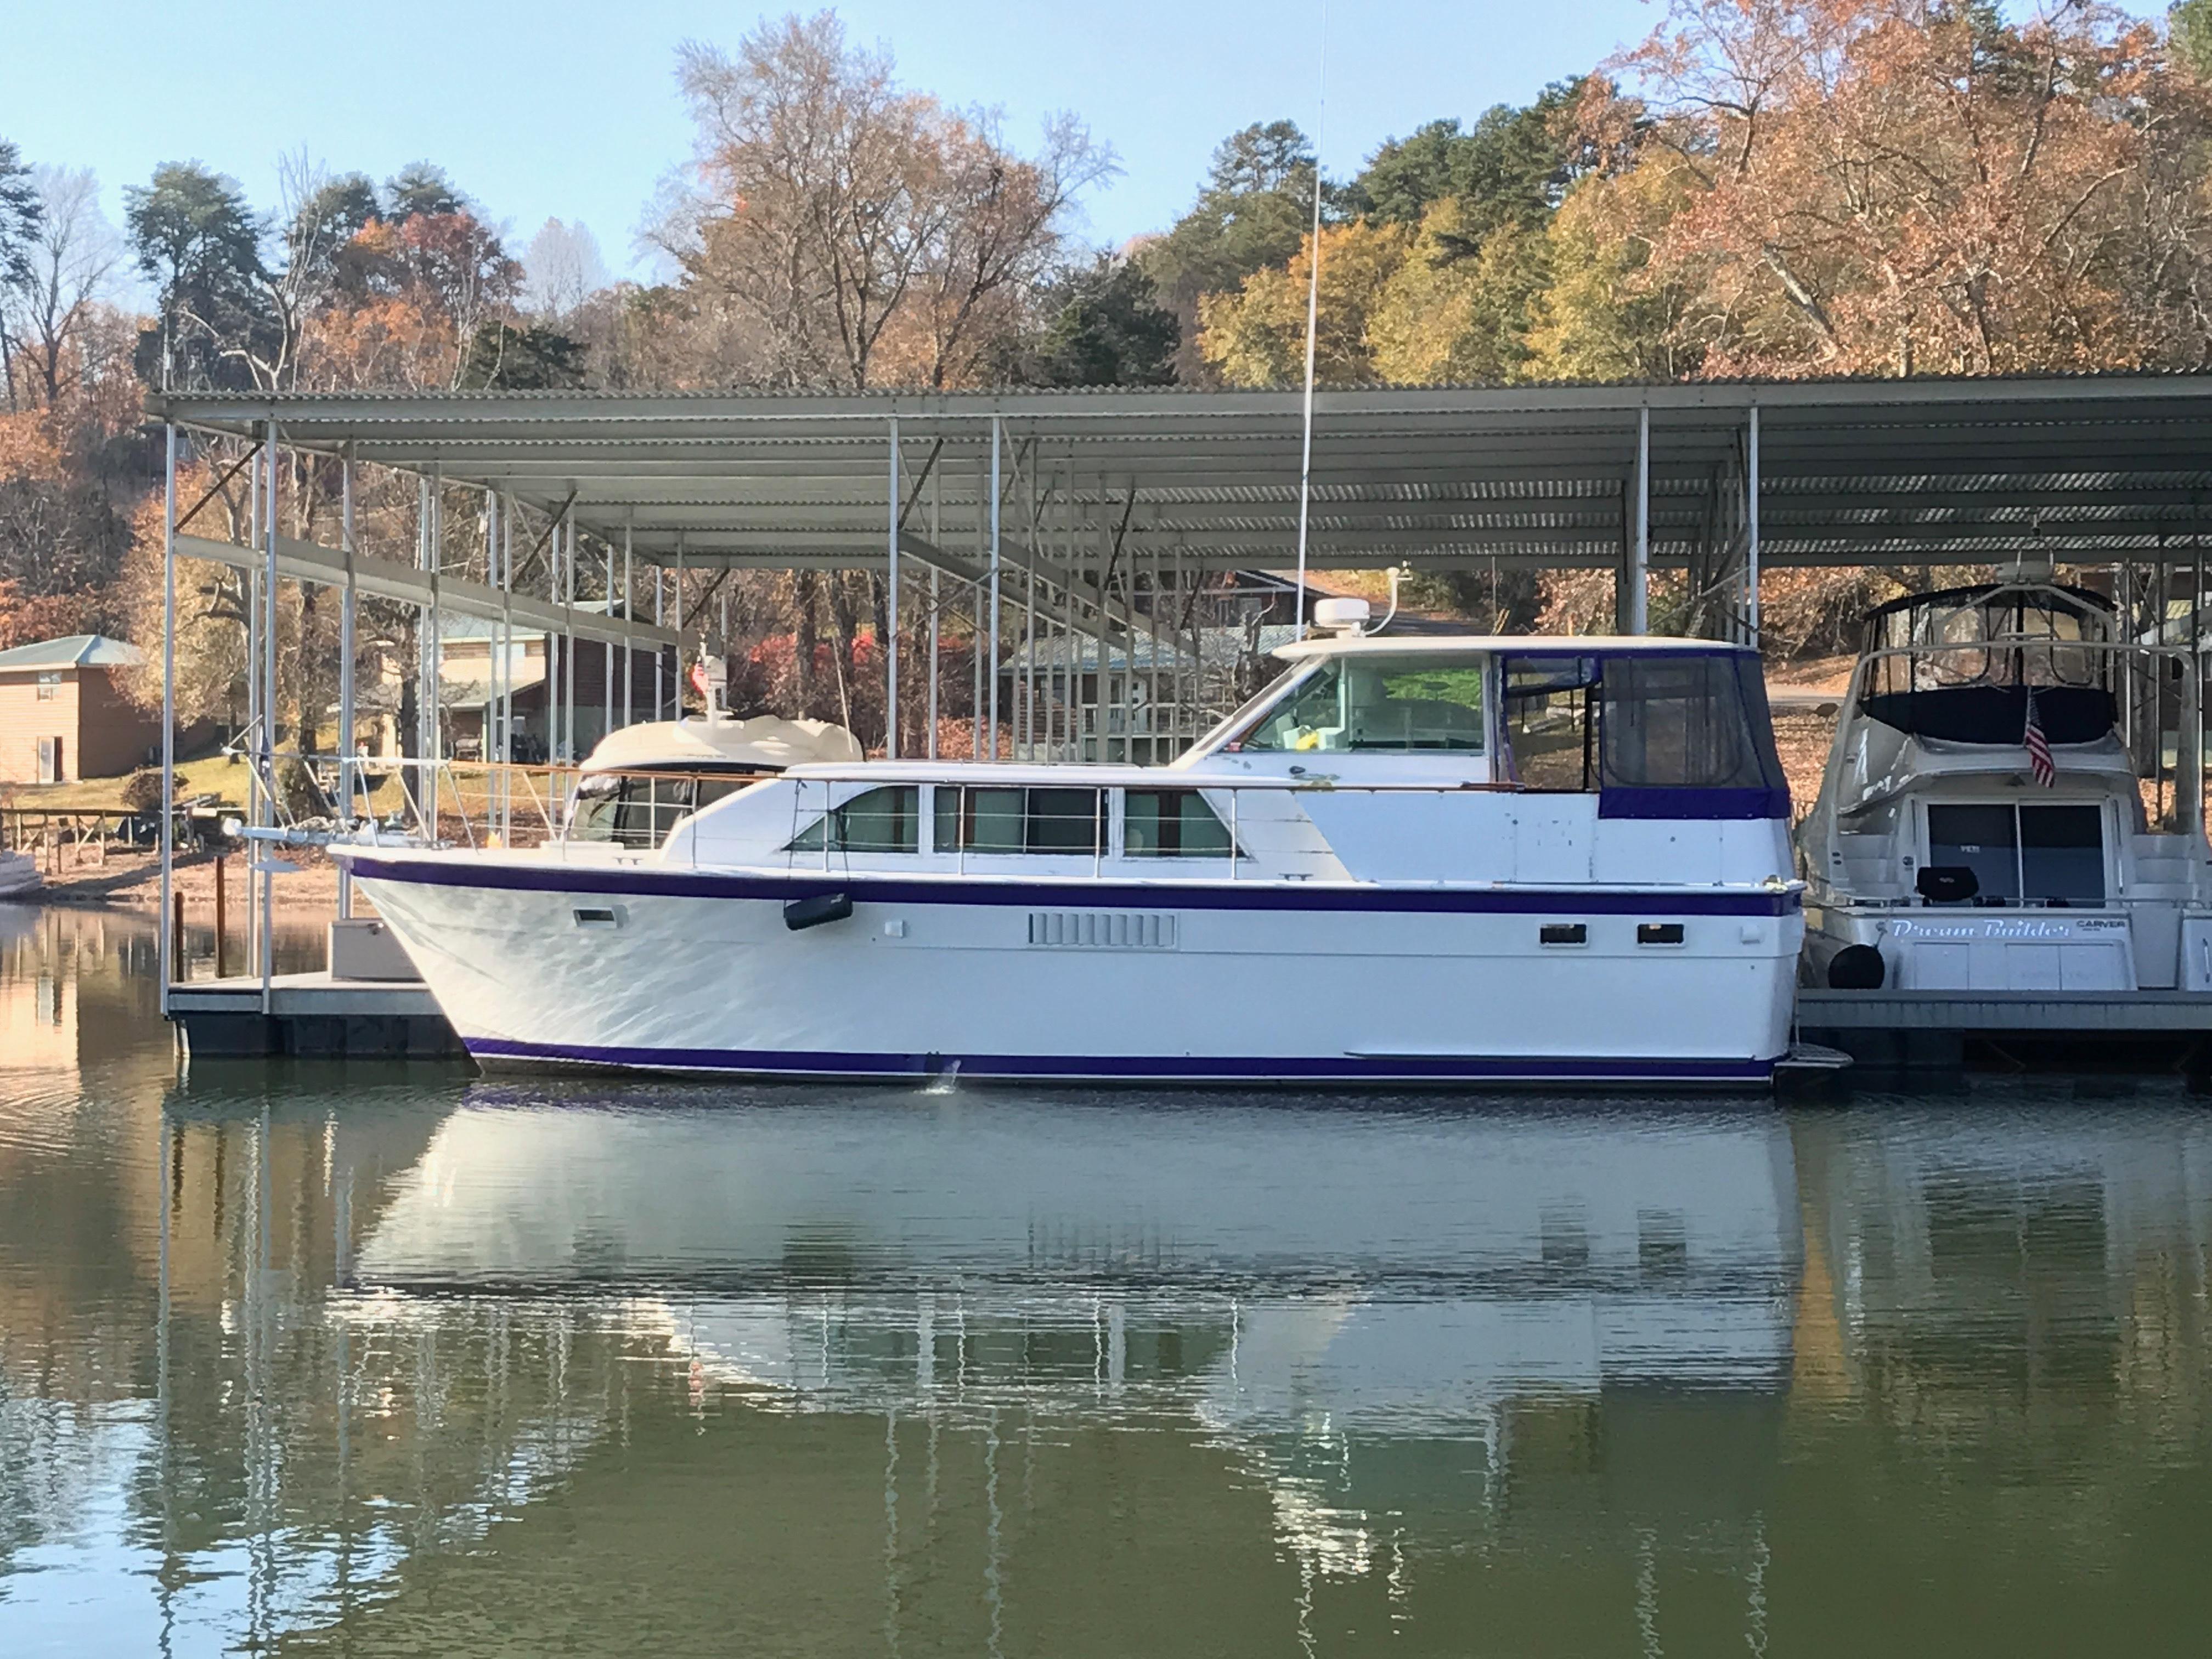 1973 Hatteras 43 Double Cabin Motoryacht, Chattanooga Tennessee - boats.com